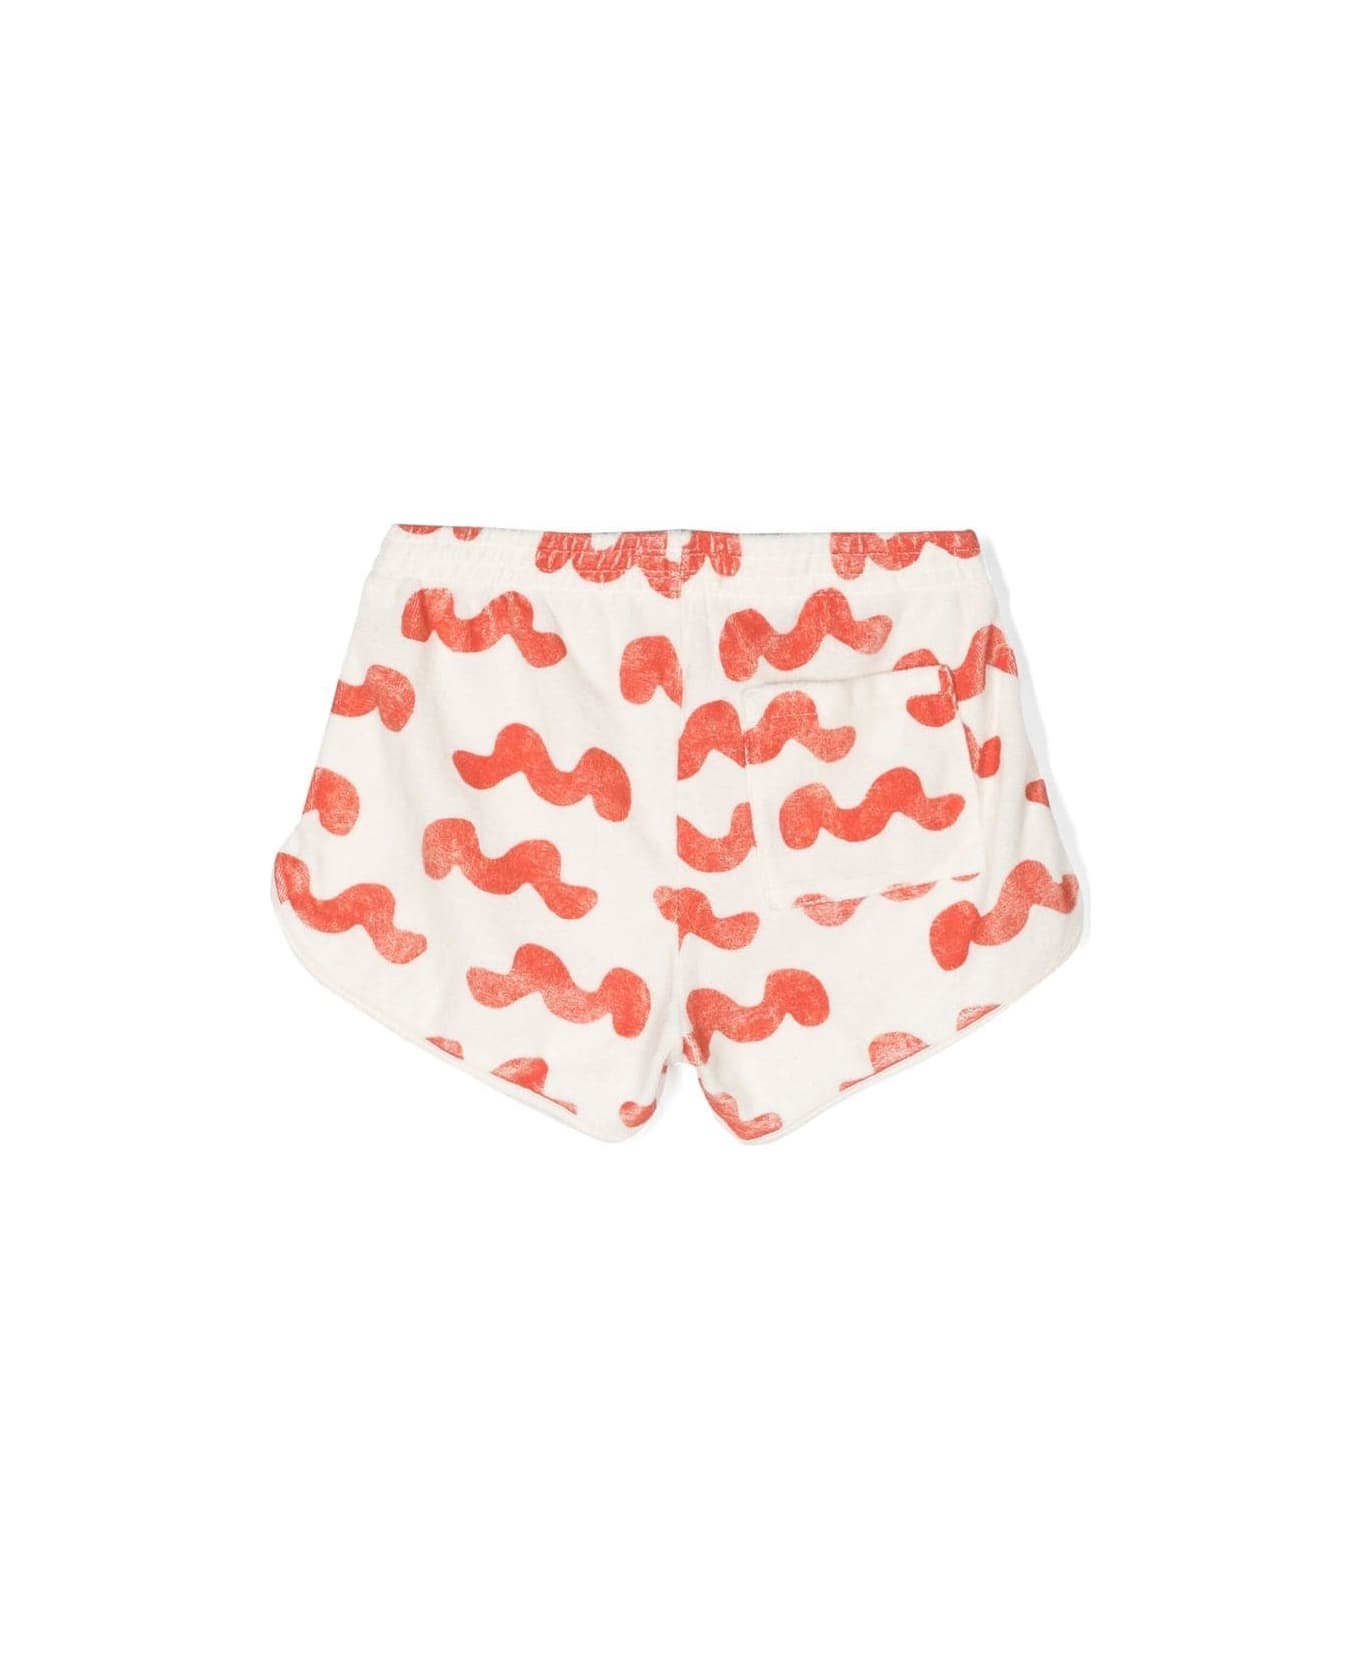 Bobo Choses Waves All Over Terry Shorts - Multi